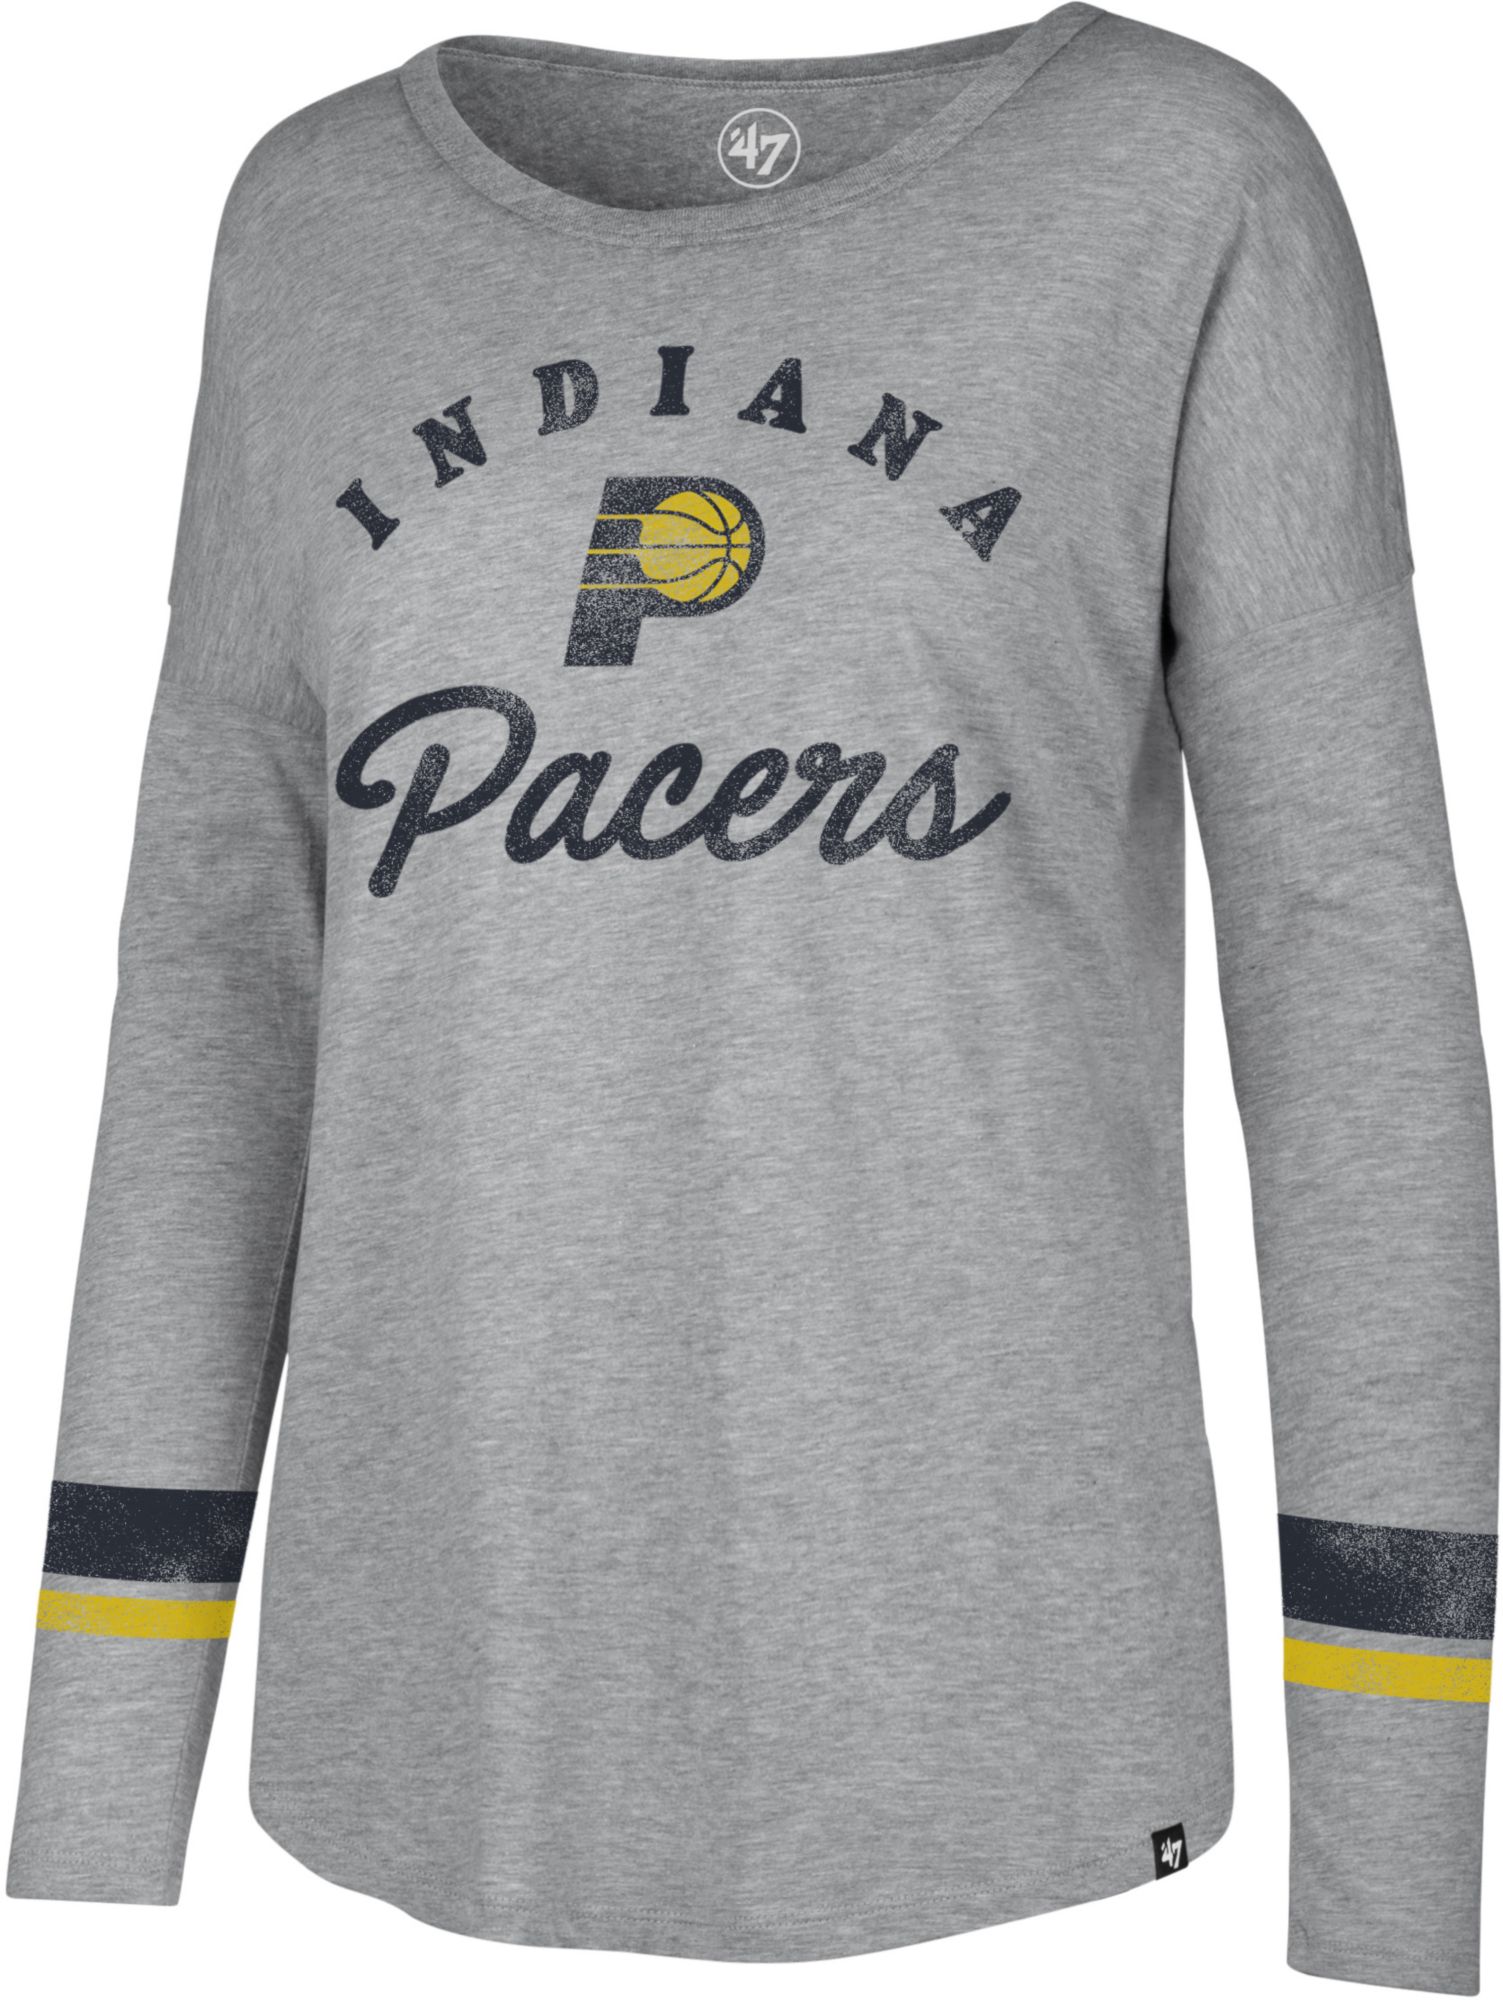 women's indiana pacers shirts